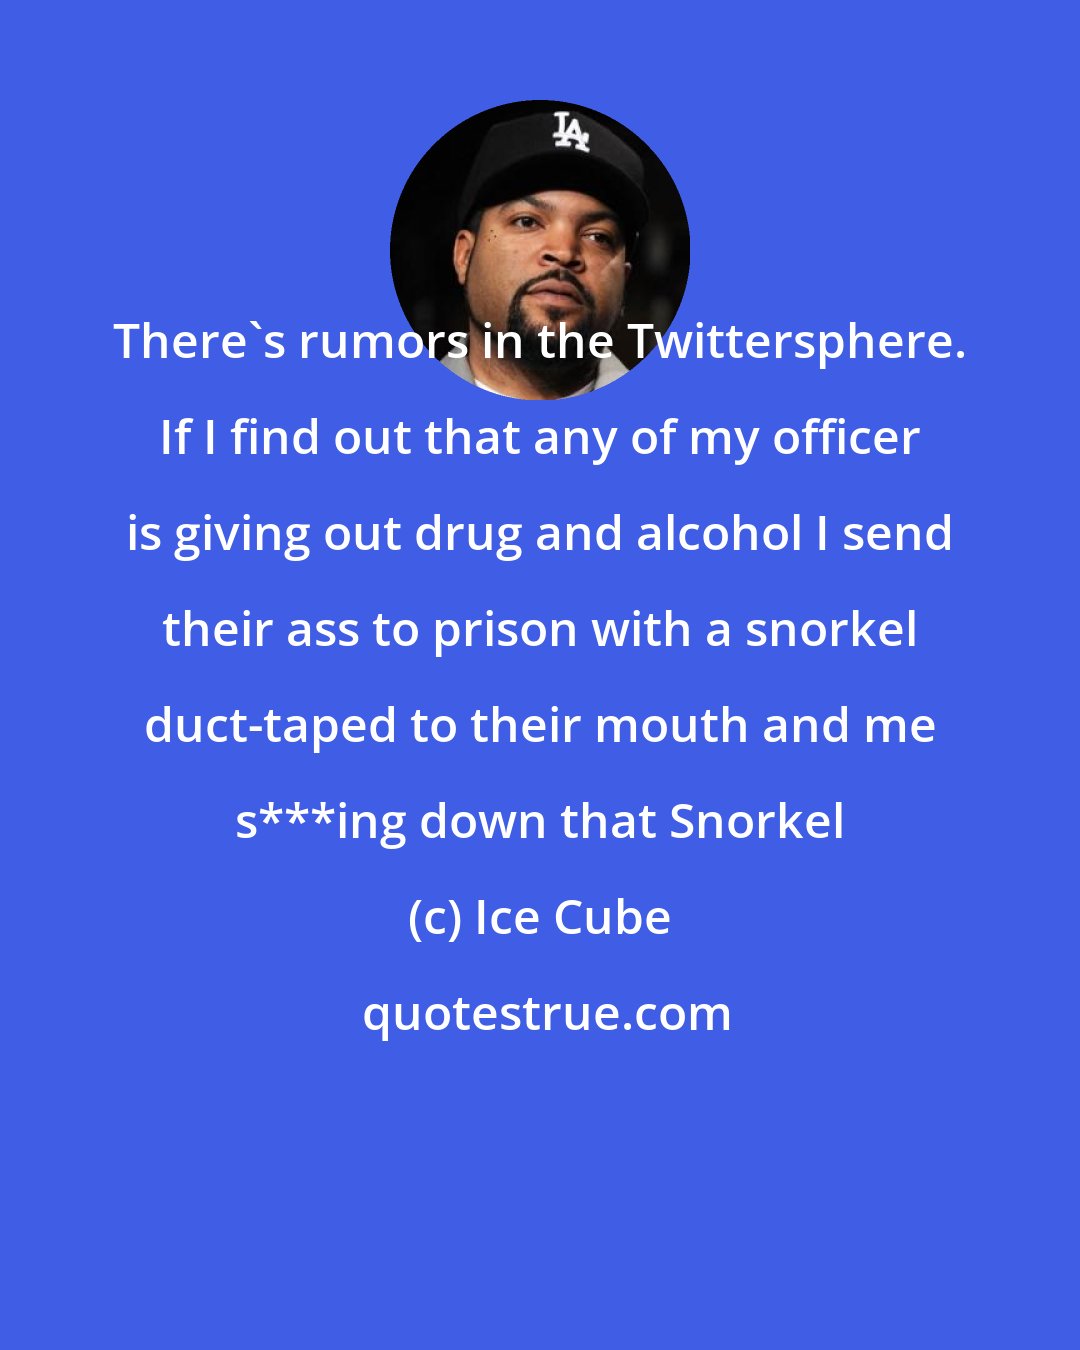 Ice Cube: There's rumors in the Twittersphere. If I find out that any of my officer is giving out drug and alcohol I send their ass to prison with a snorkel duct-taped to their mouth and me s***ing down that Snorkel